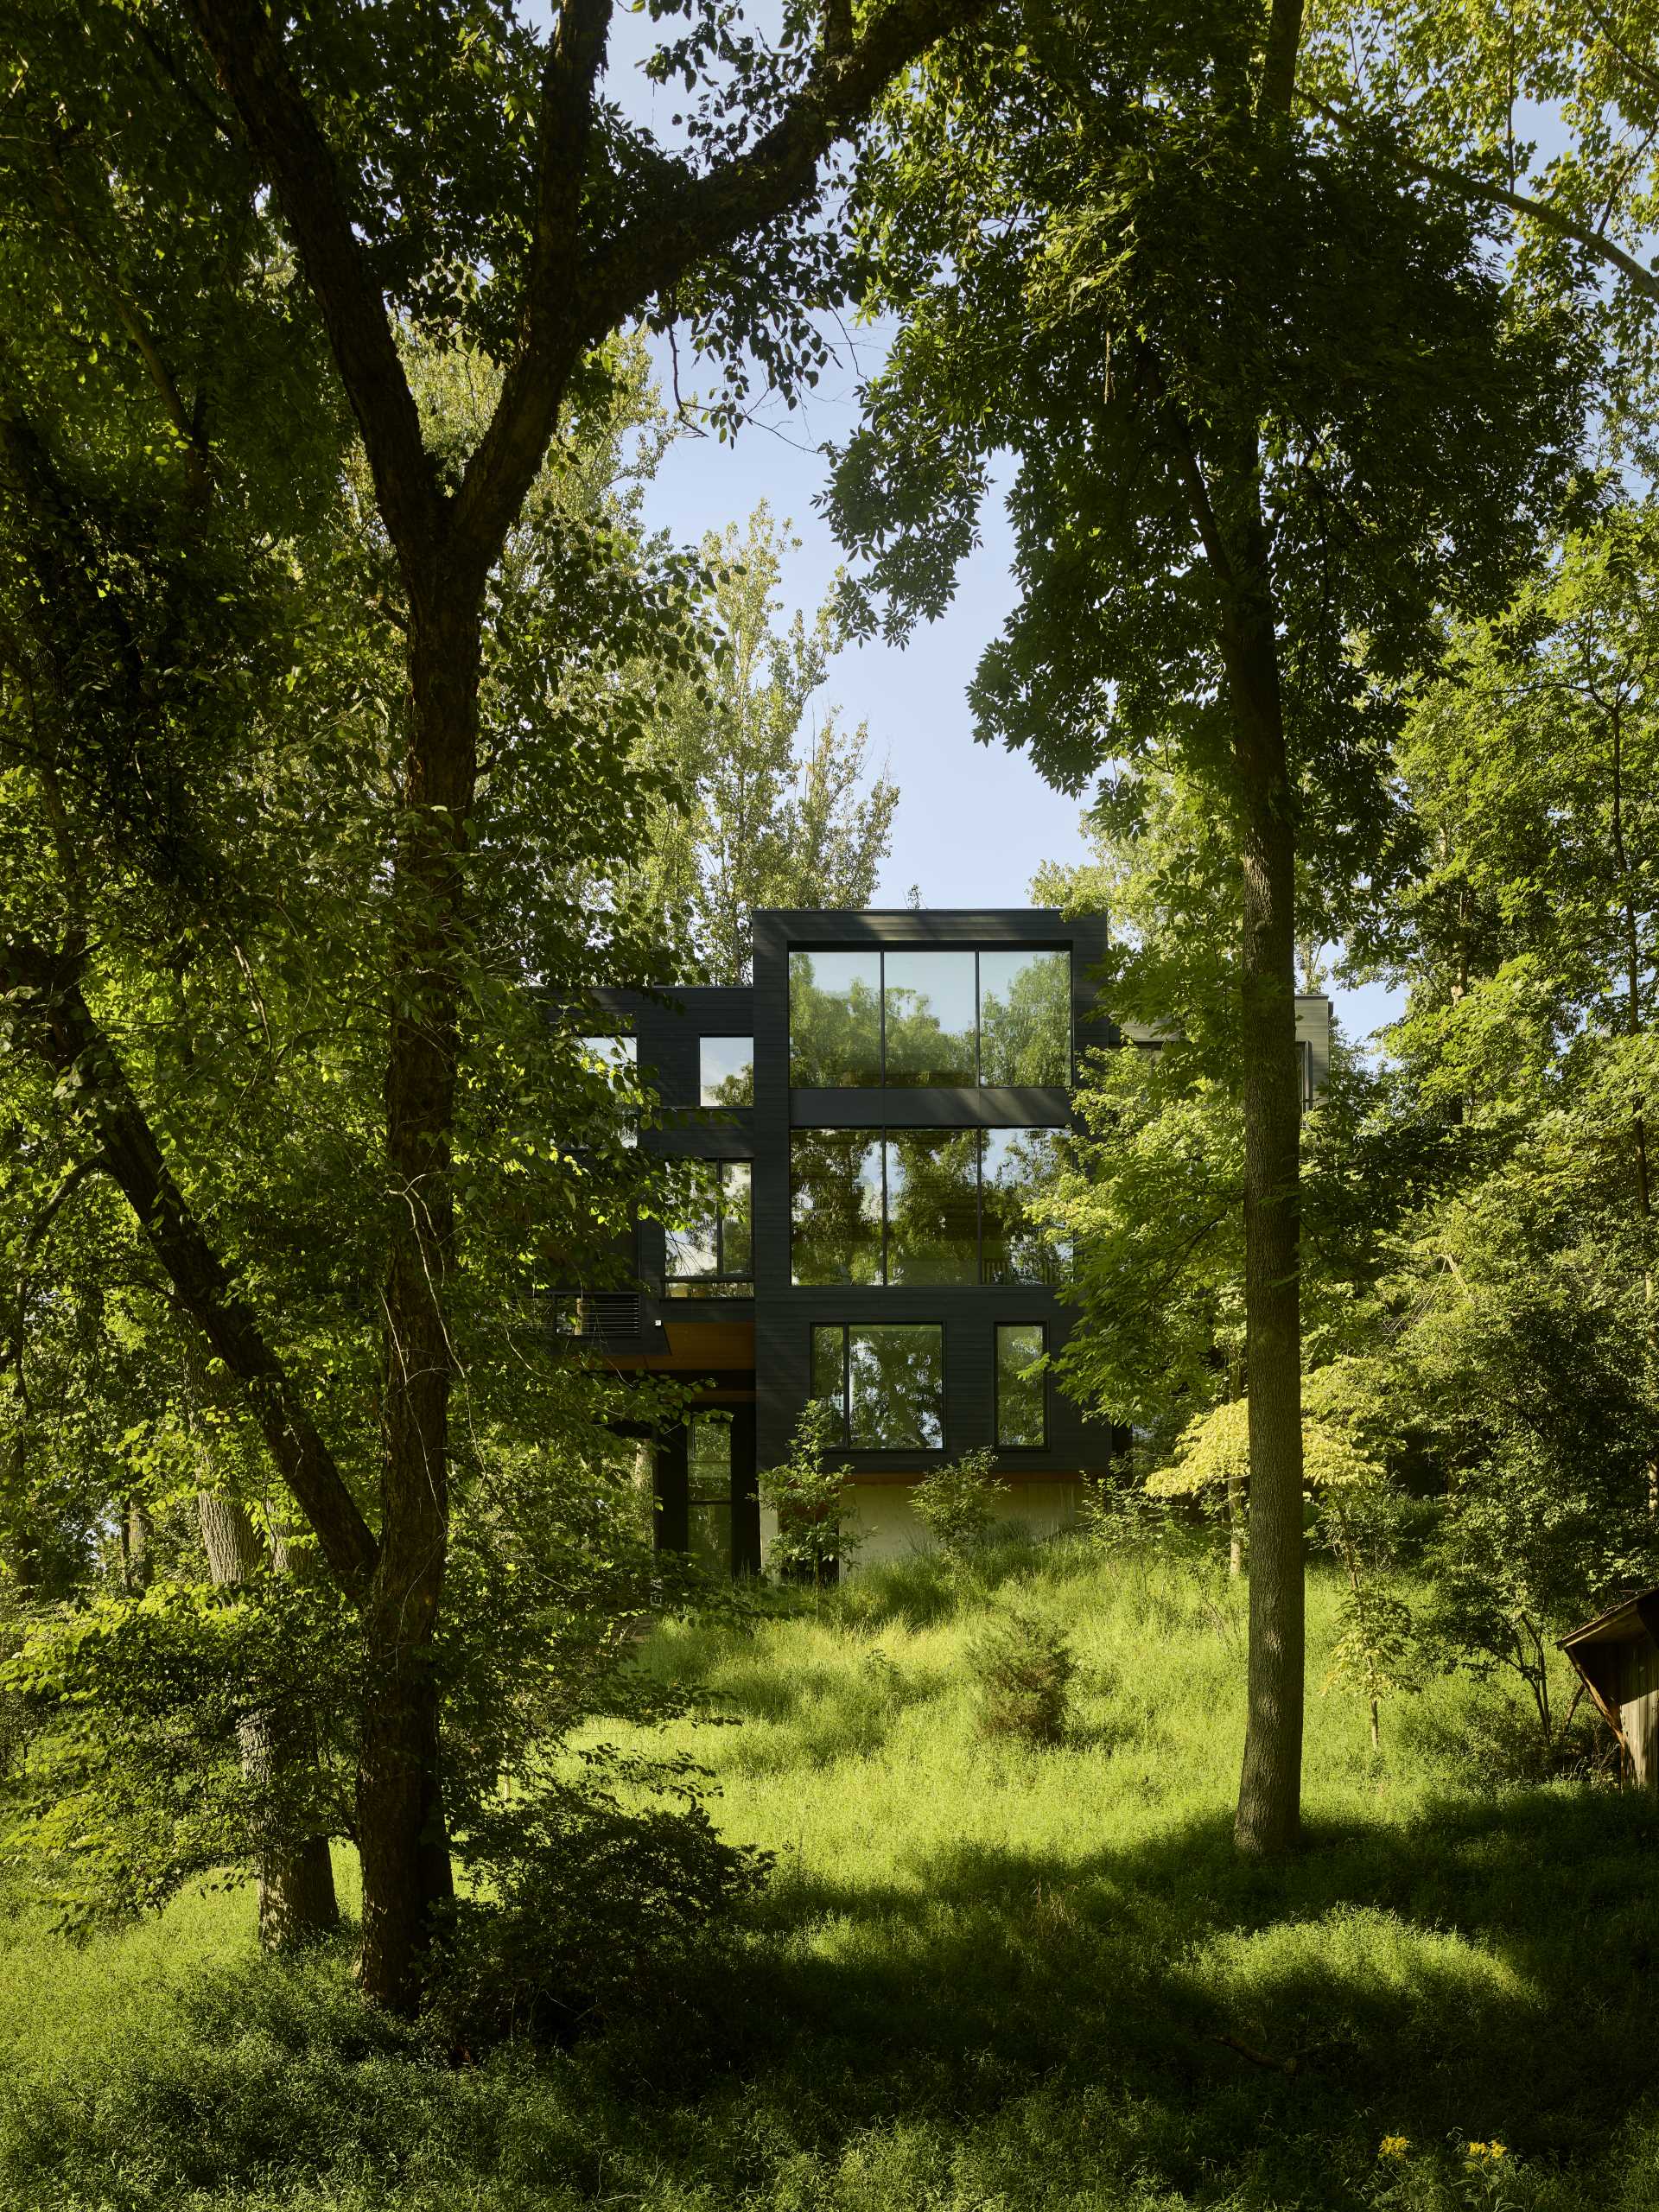 A modern home with an abundance of windows, is also surrounded by forest.